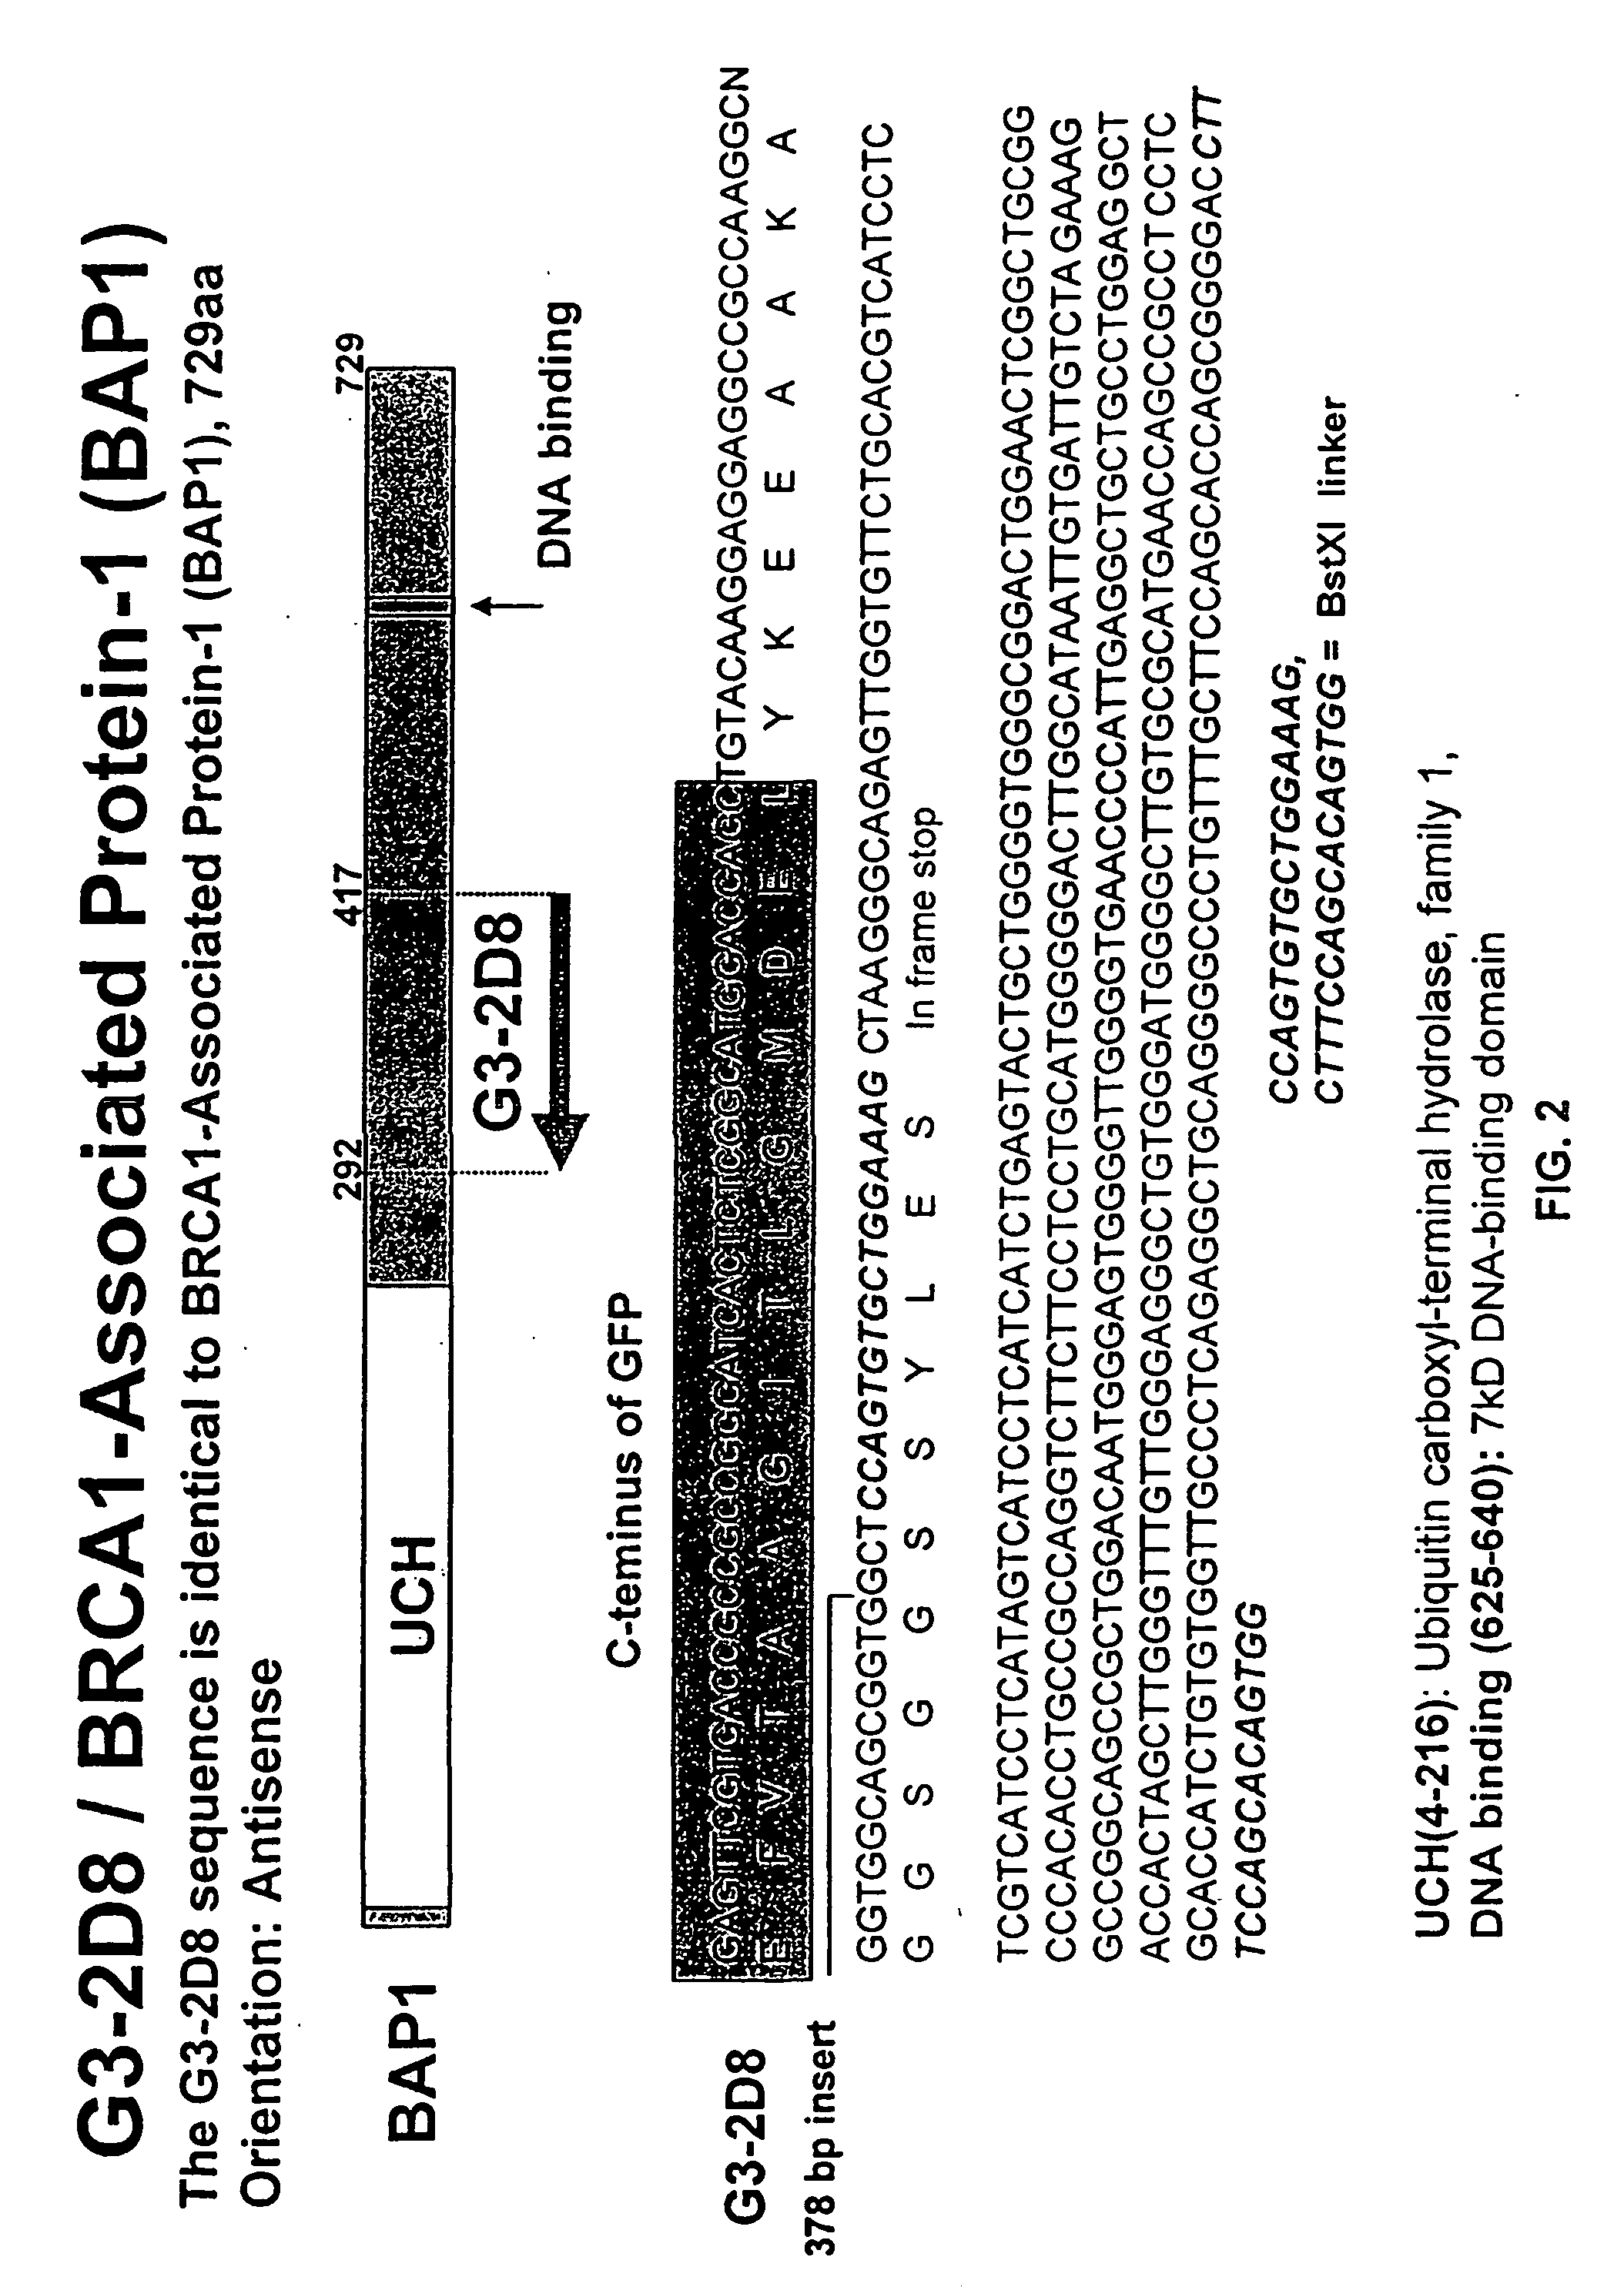 Methods of assaying for cell cycle modulators